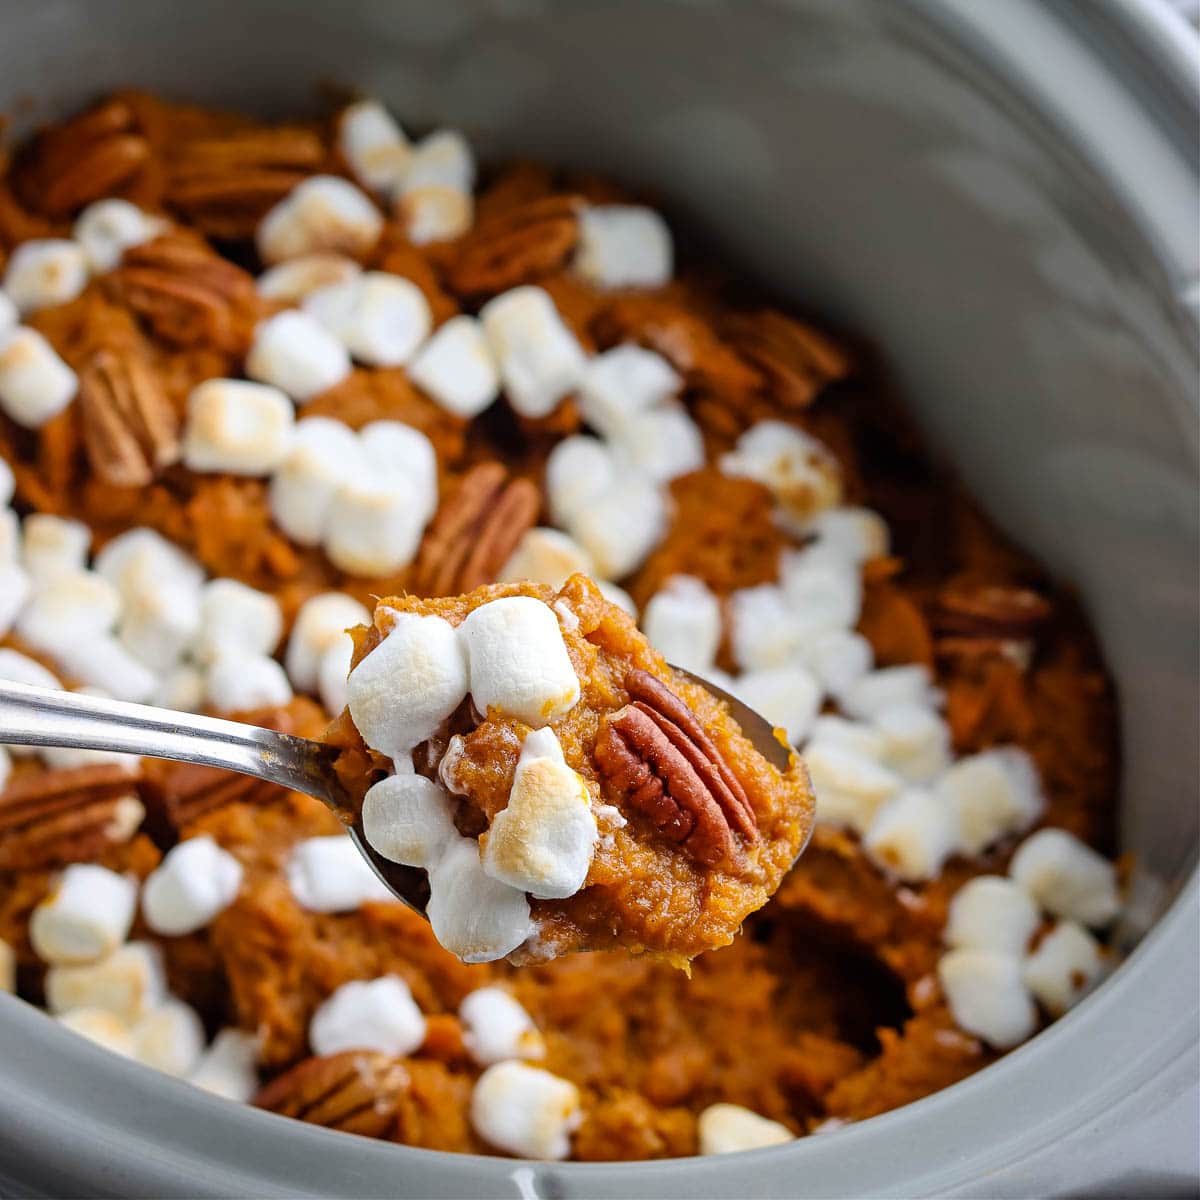 Crock pot with sweet potato casserole with pecans and marshmallows.